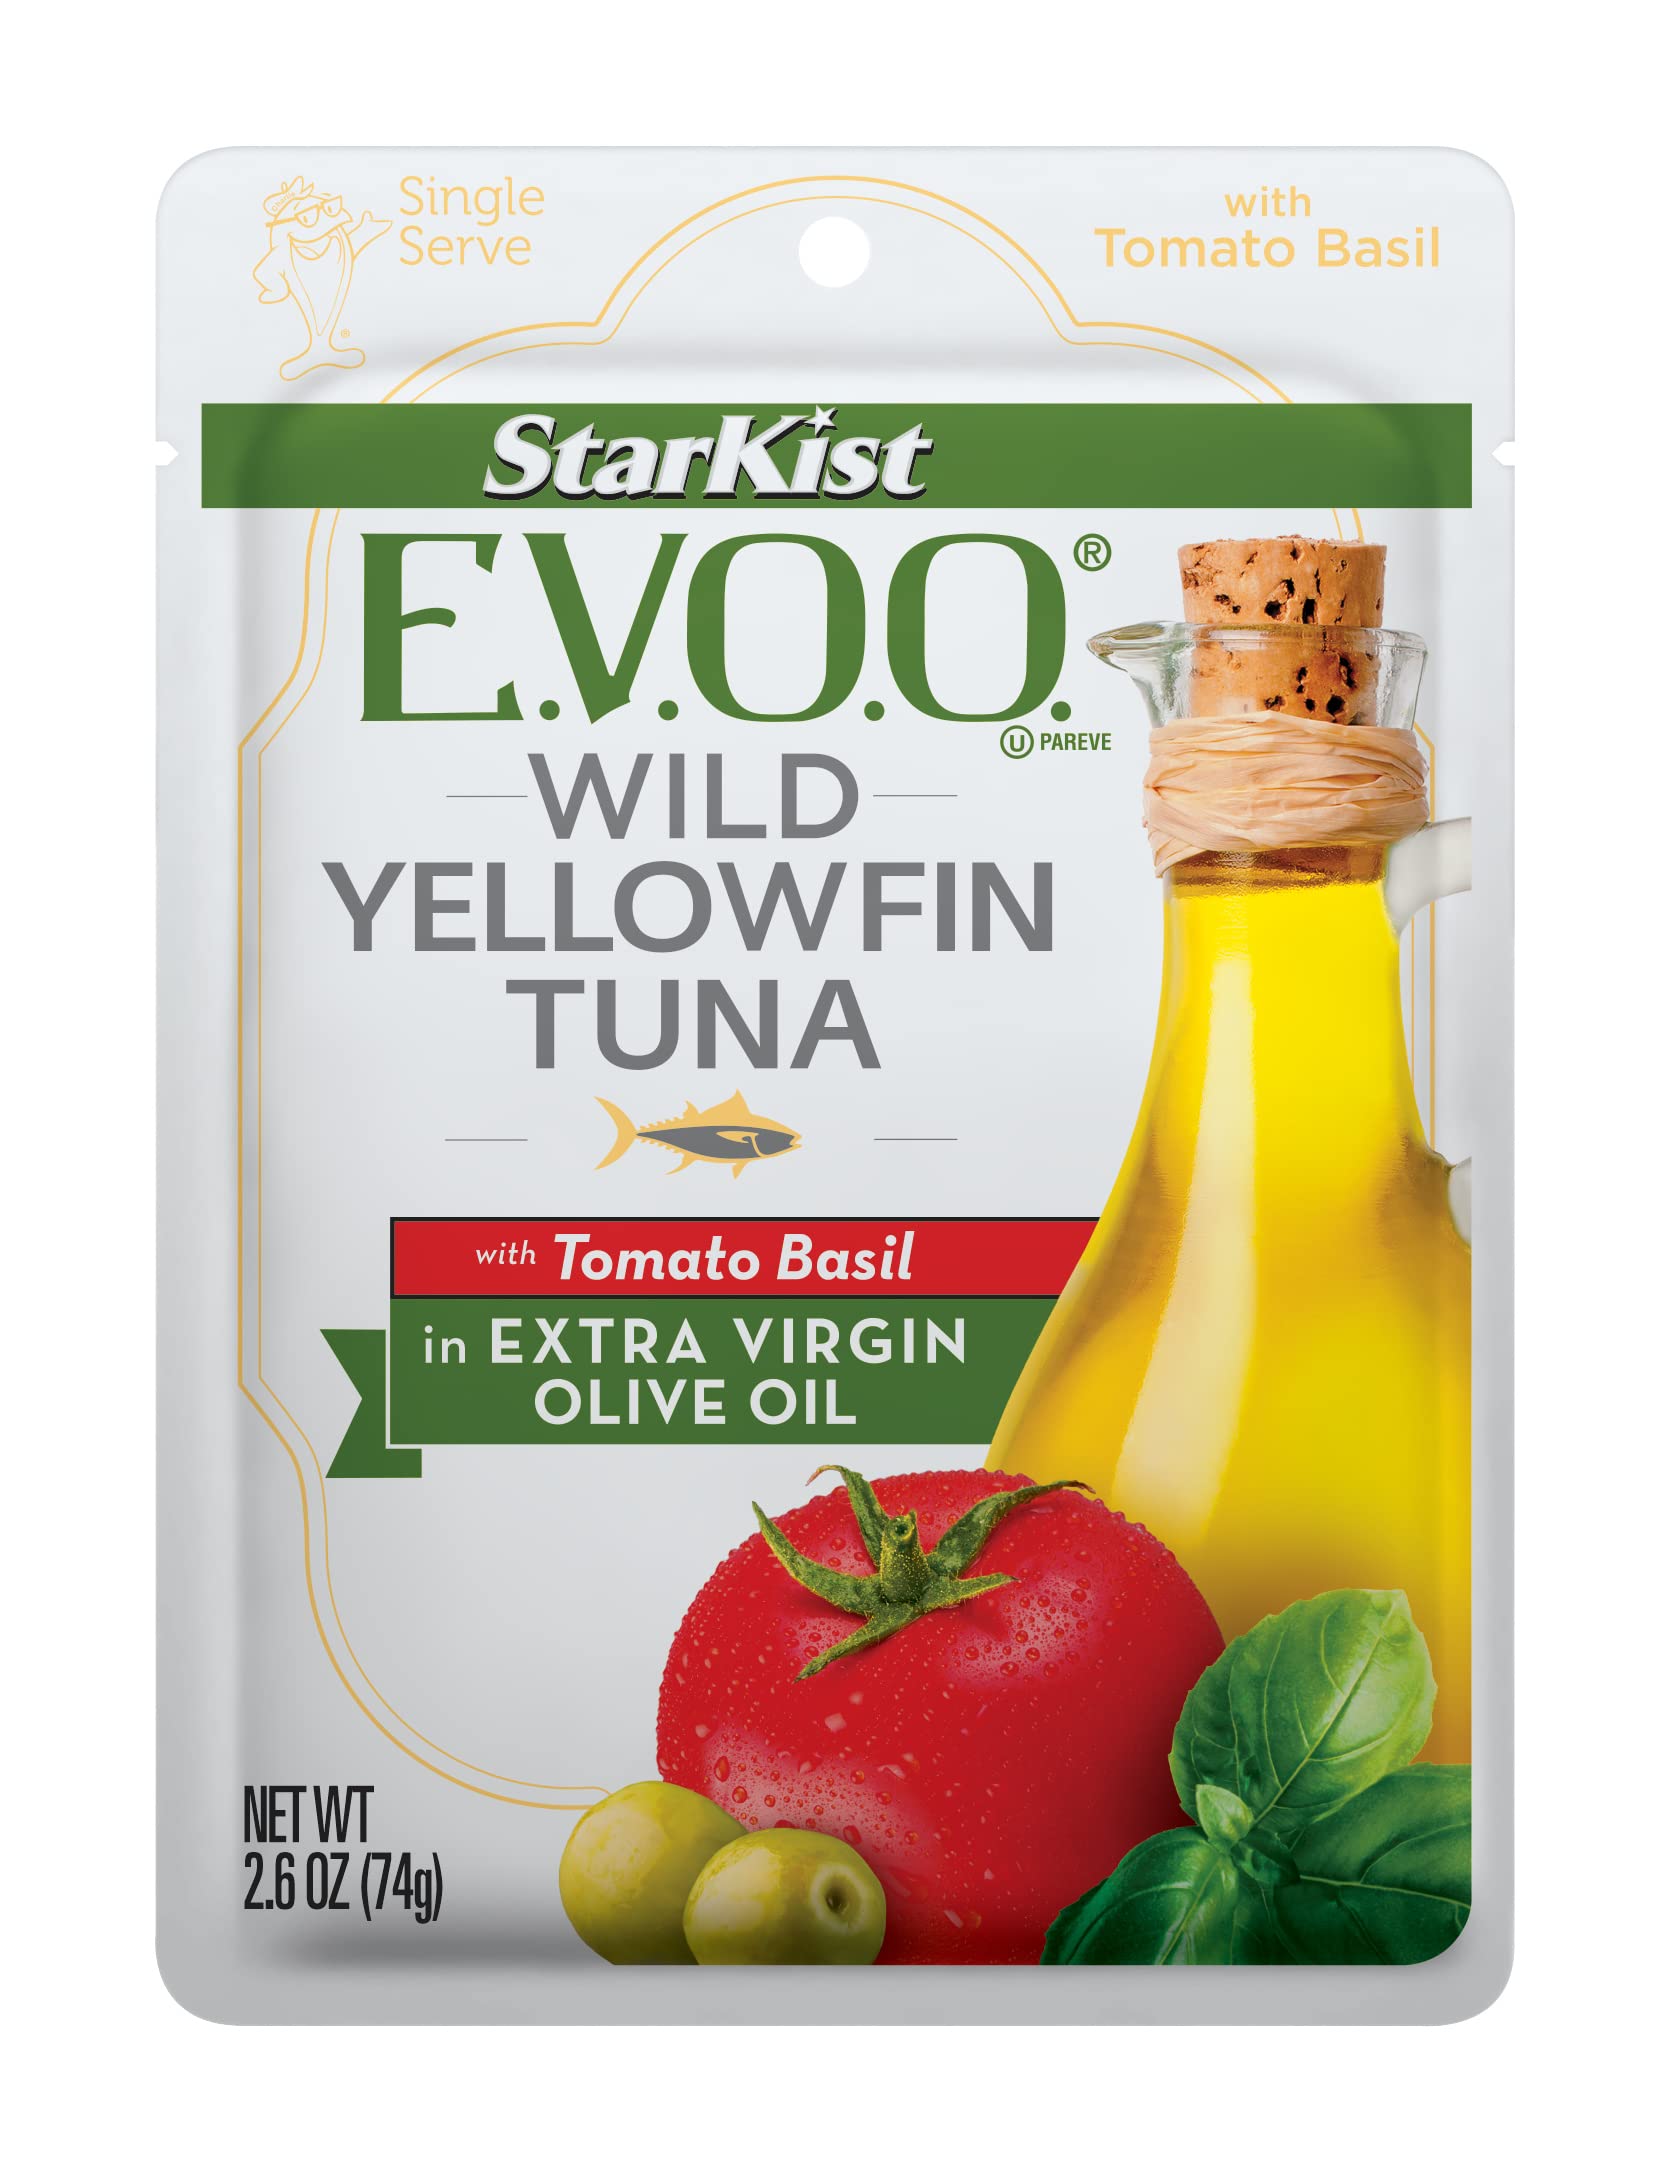 StarKist E.V.O.O. Wild Yellowfin Tuna in Extra Virgin Olive Oil with Tomato & Basil, 2.6 Oz Pouch, Pack of 24, Free Prime Shipping, Lowest in 1+year $24.85